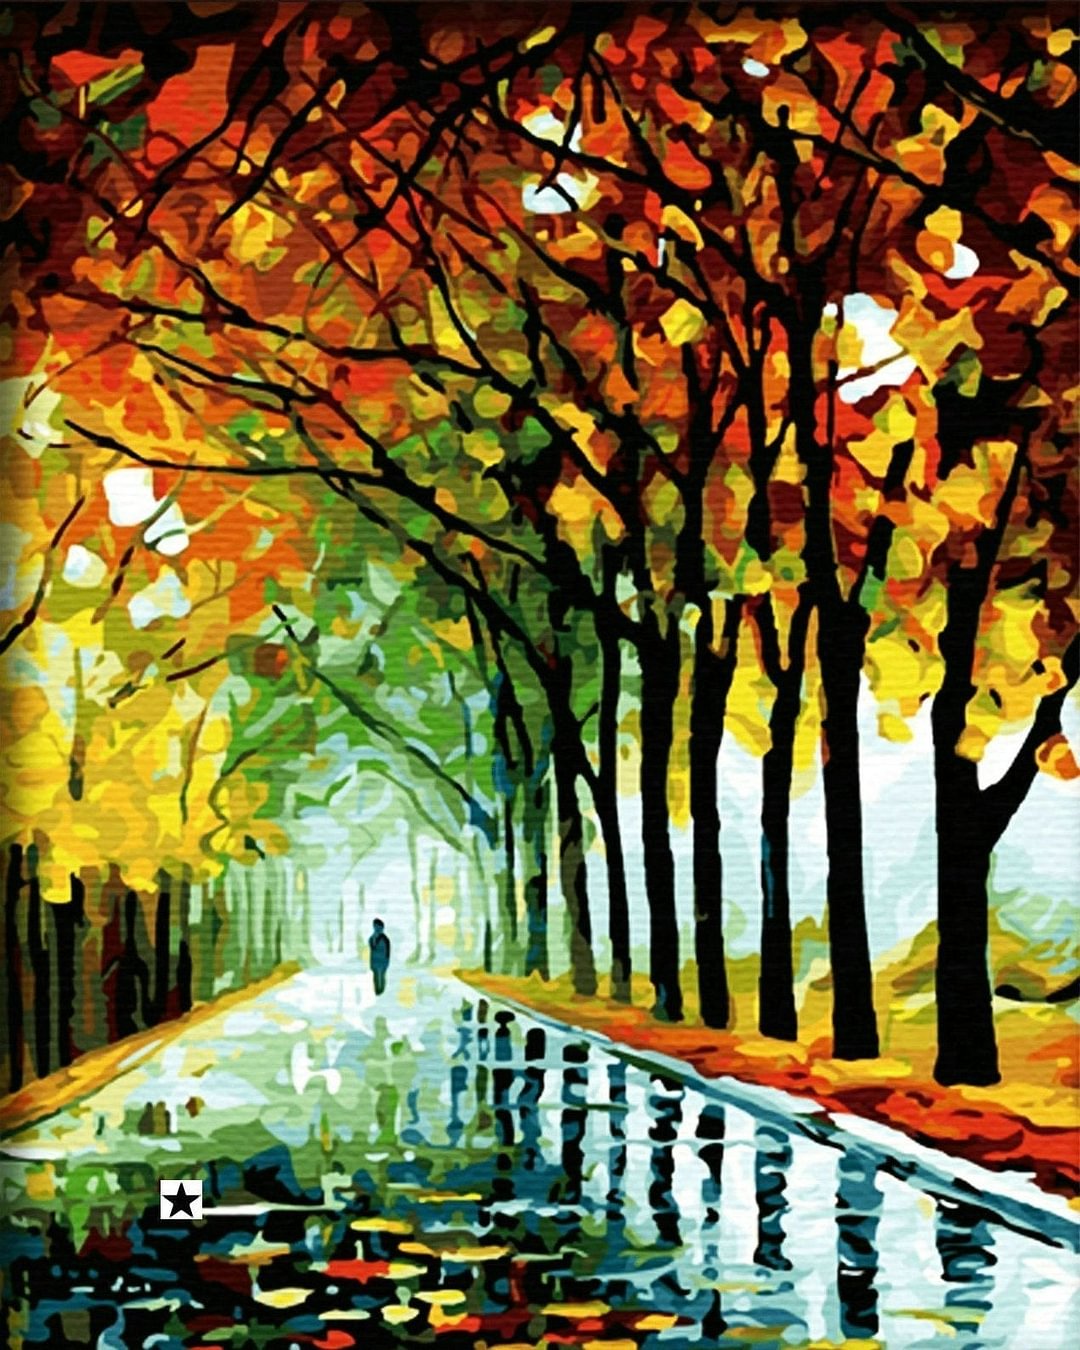 Landscape Street Paint By Numbers Kits UK For Adult HQD1407